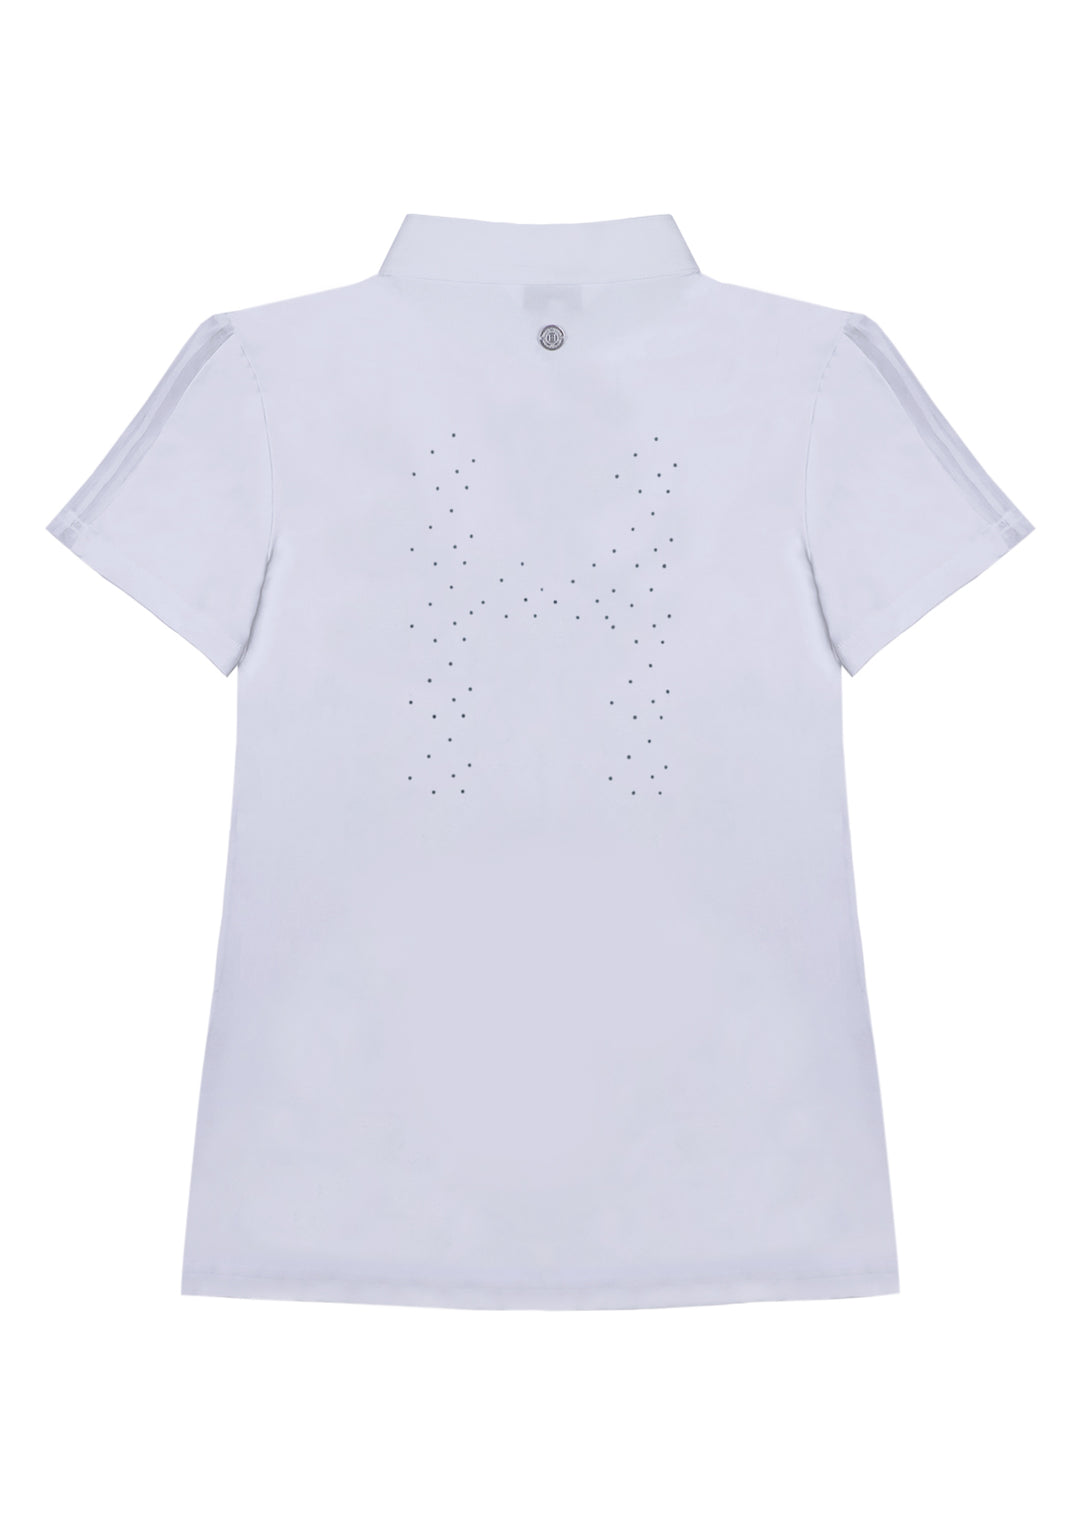 Prystie Women's Short Sleeve Competition Polo